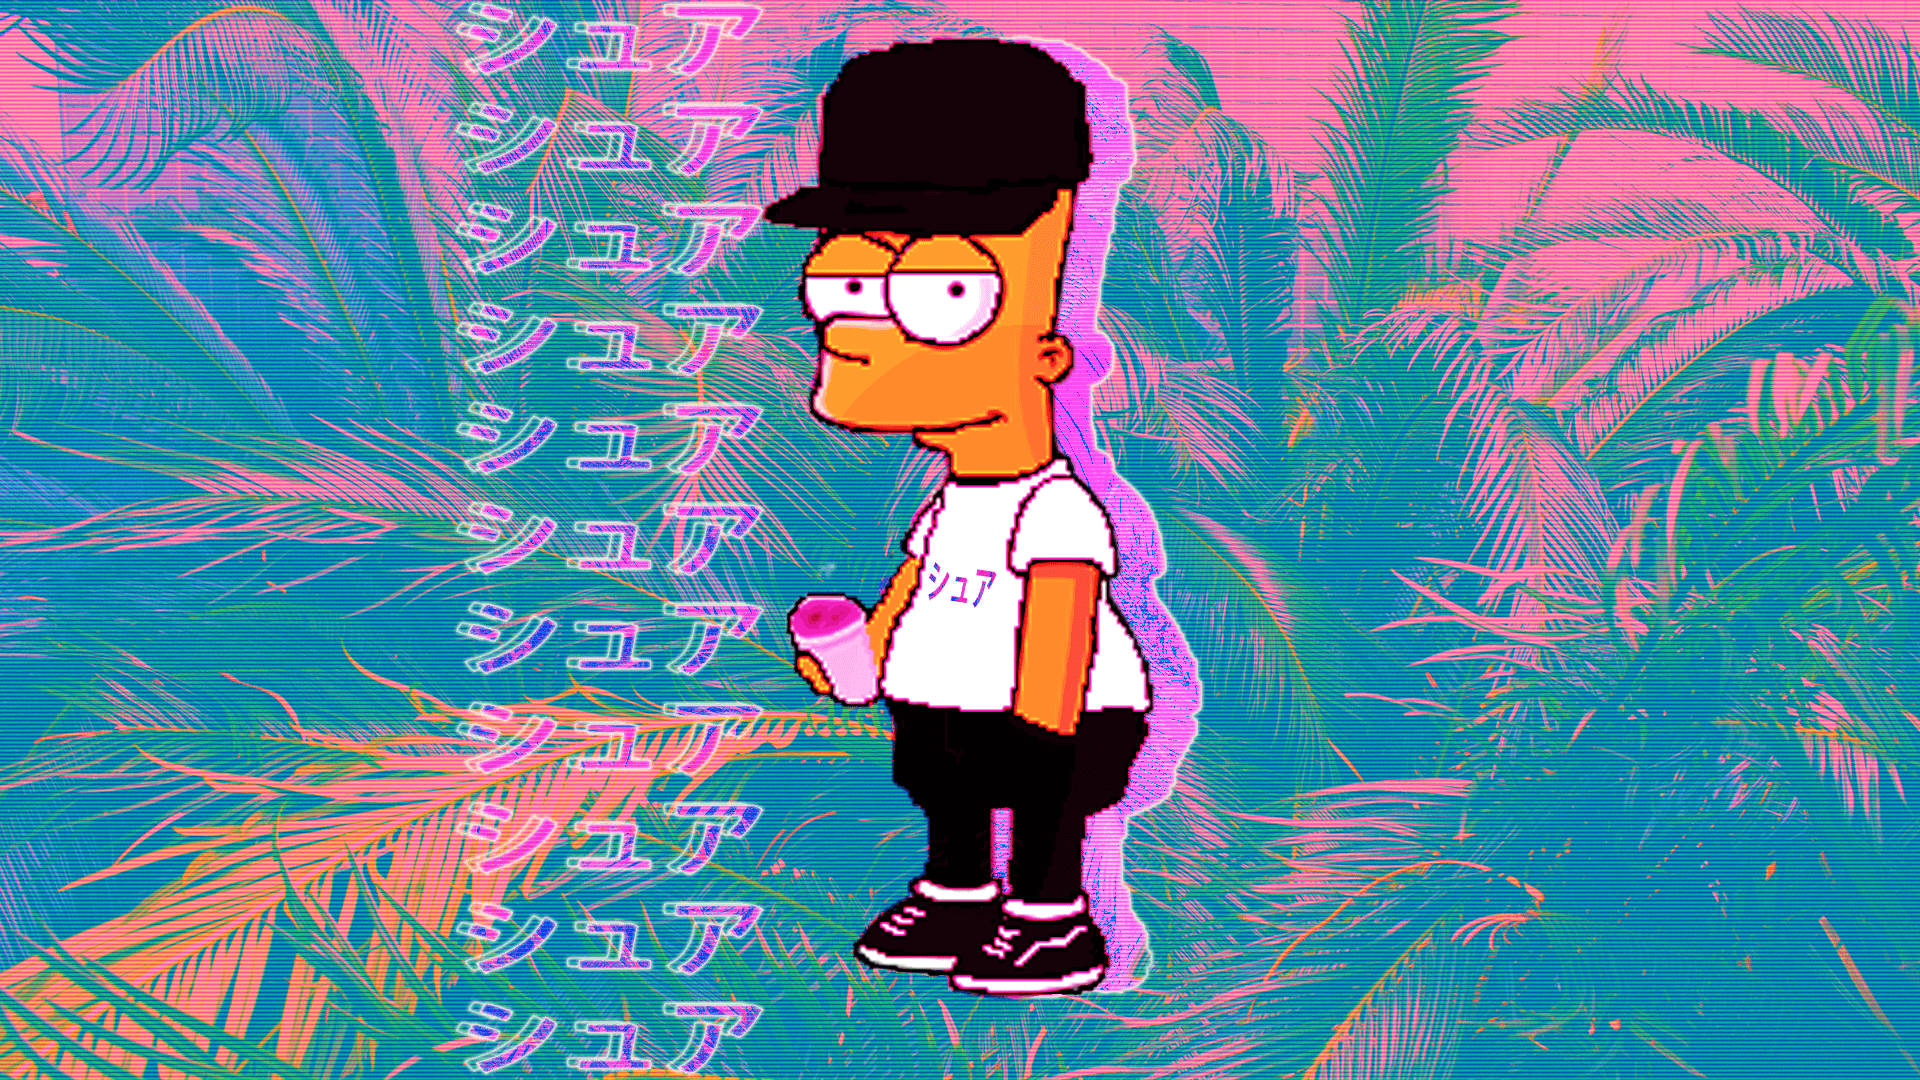 Top 999+ Bart Simpson Wallpaper Full HD, 4K✅Free to Use